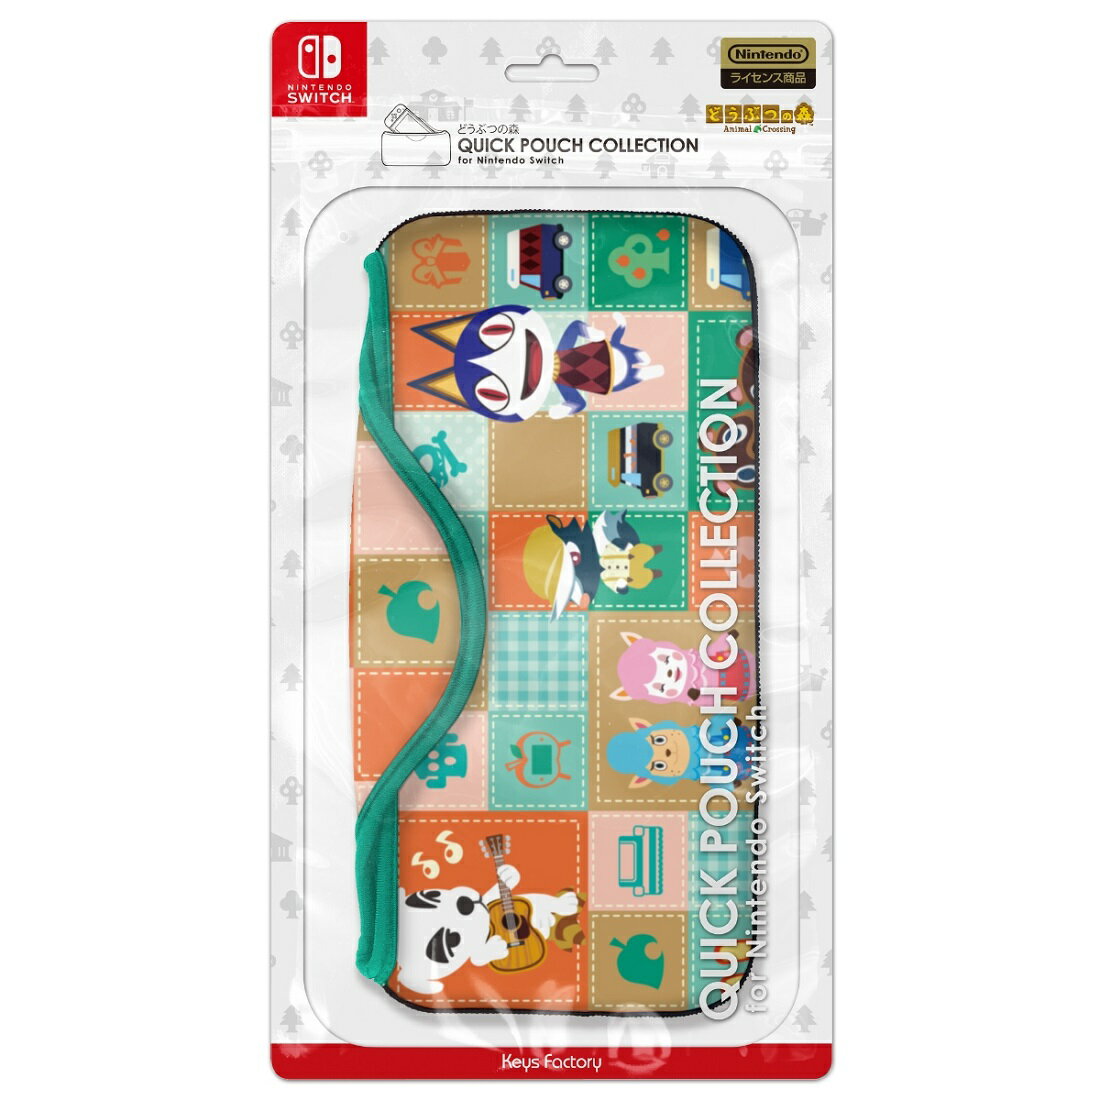 NSW QUICK POUCH COLLECTION for Nintendo Switch どうぶつの森Type-A(スイッチ 周辺機器)